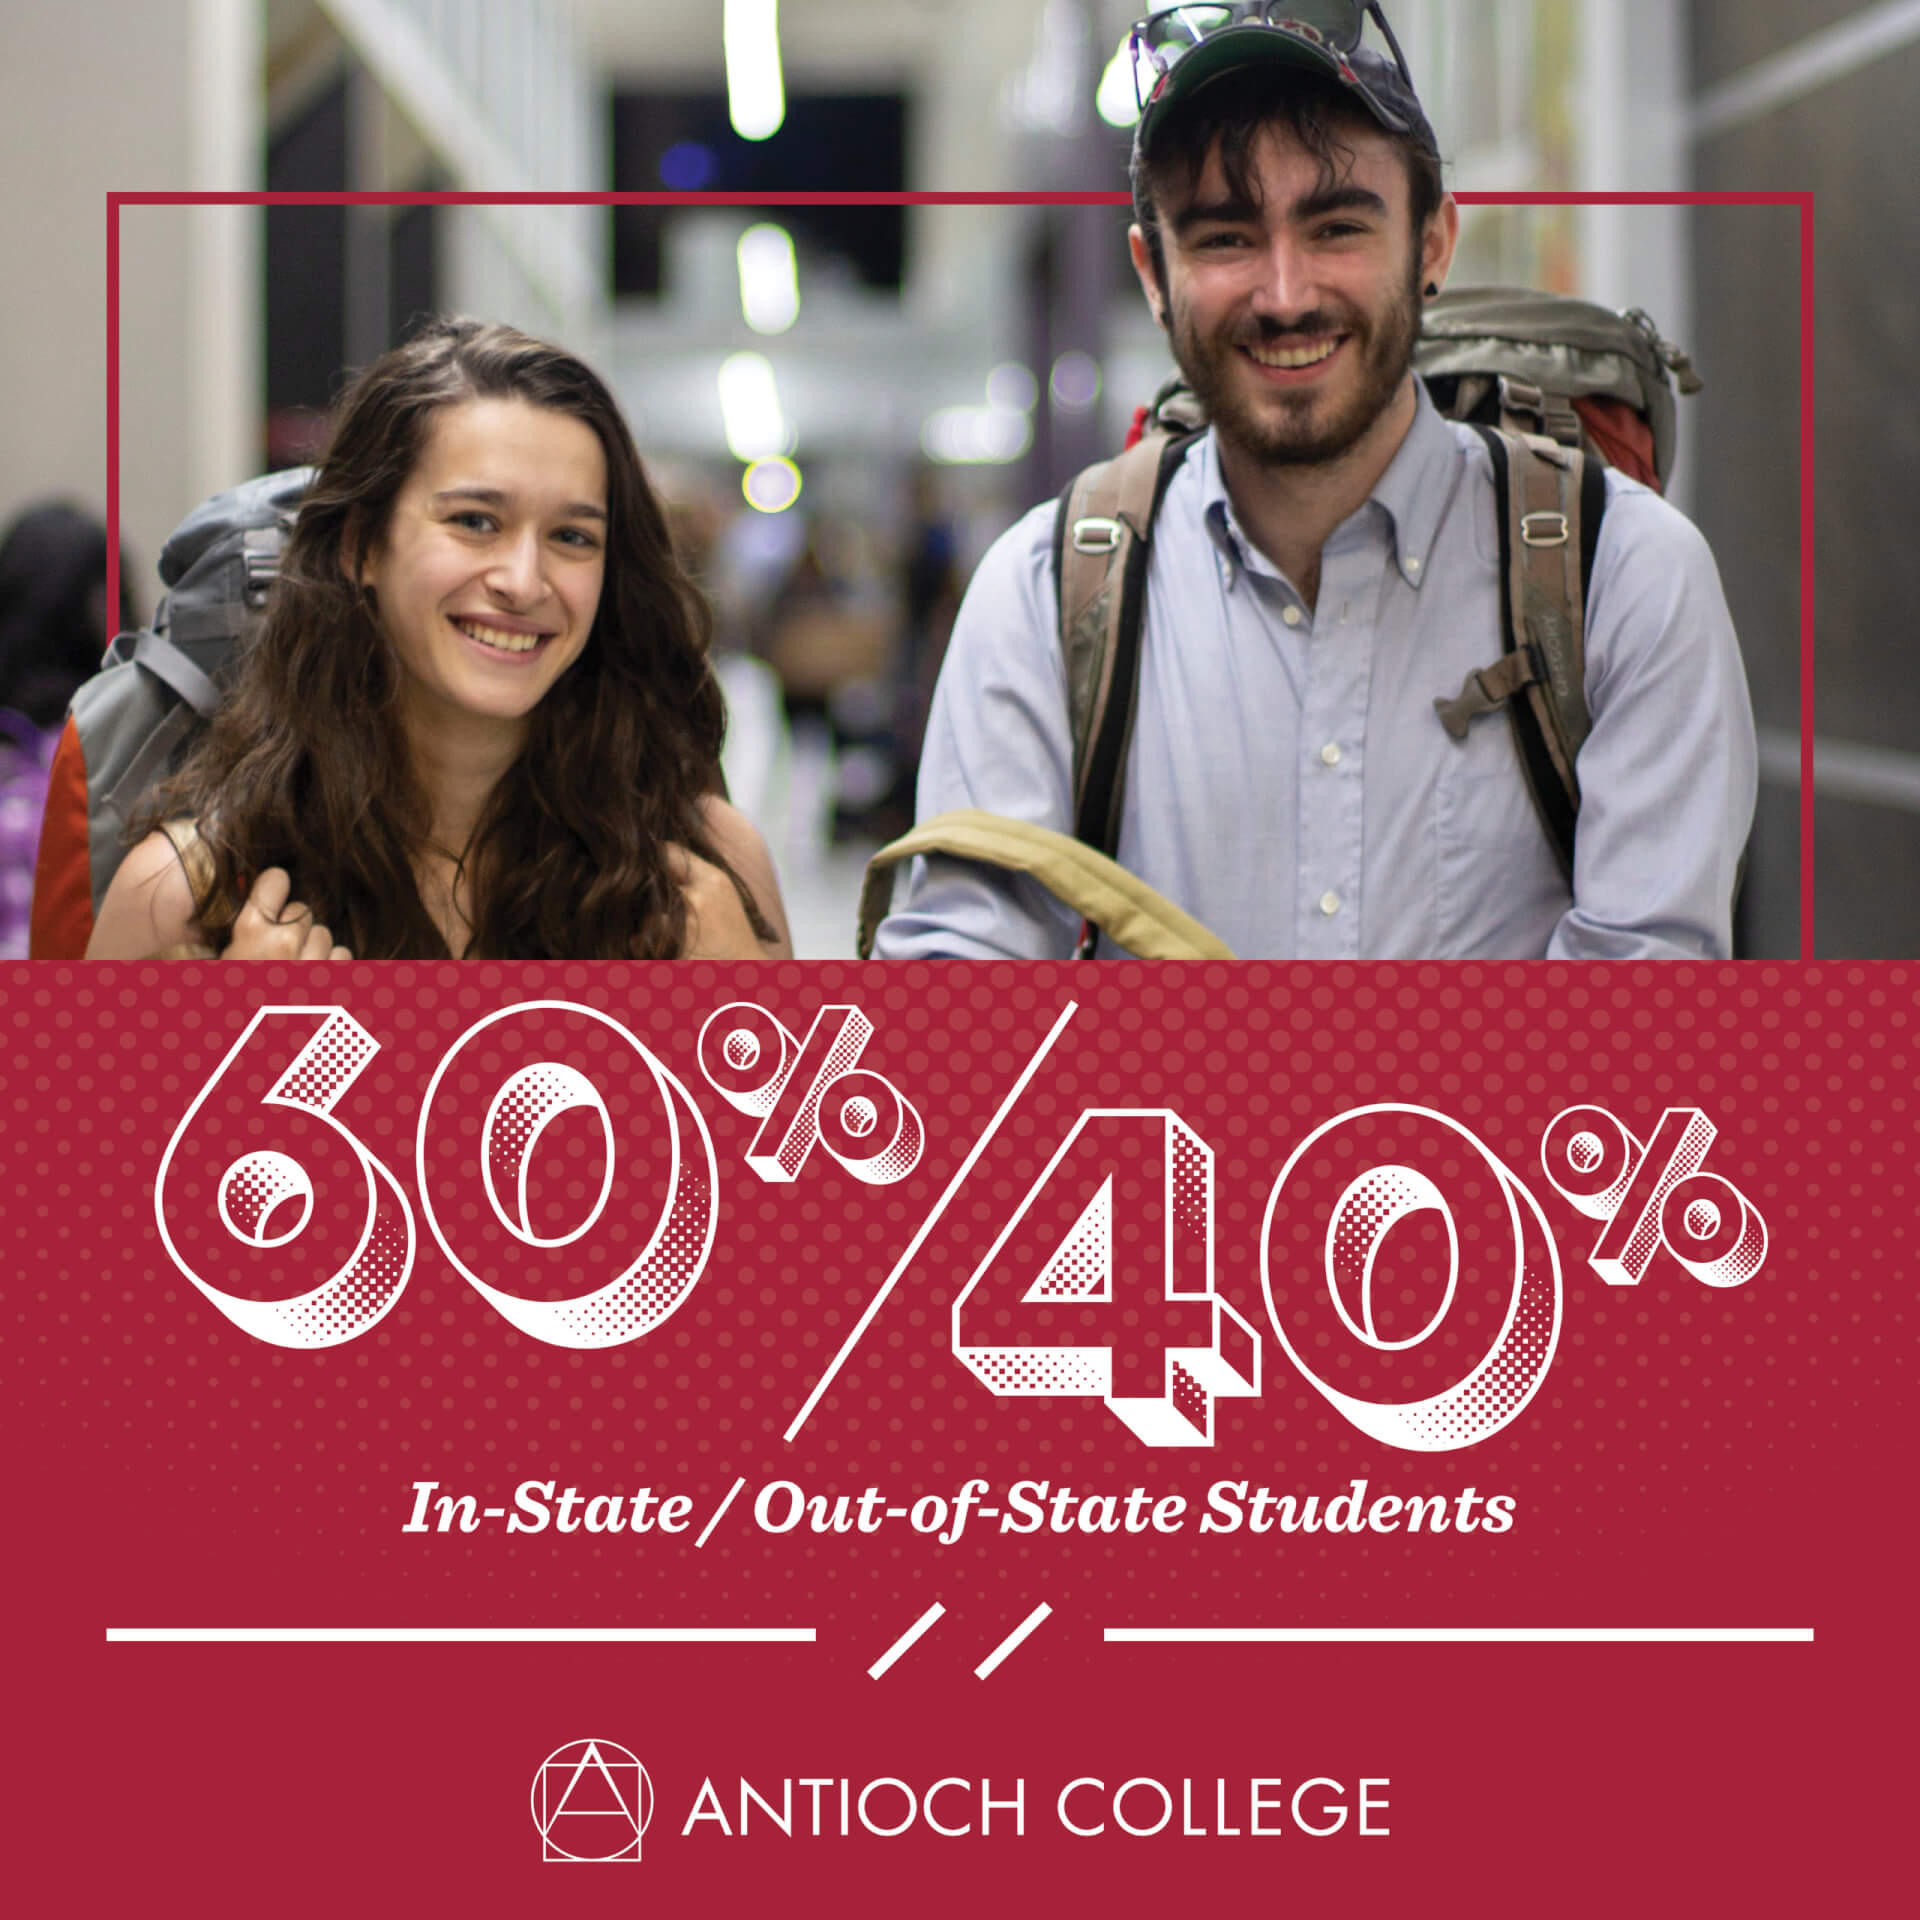 60% to 40% In-state vs. Out-of-state students